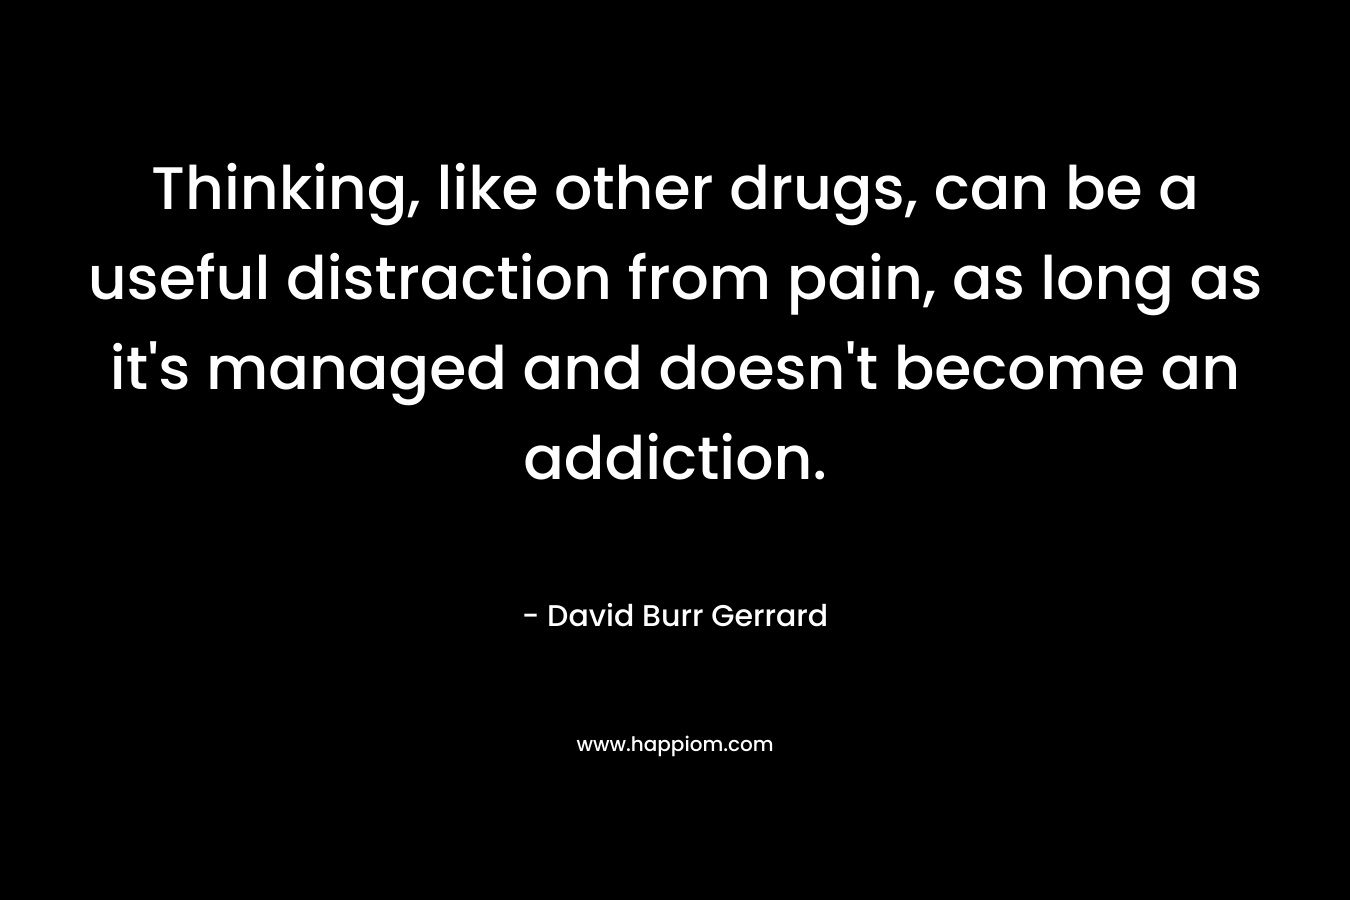 Thinking, like other drugs, can be a useful distraction from pain, as long as it’s managed and doesn’t become an addiction. – David Burr Gerrard